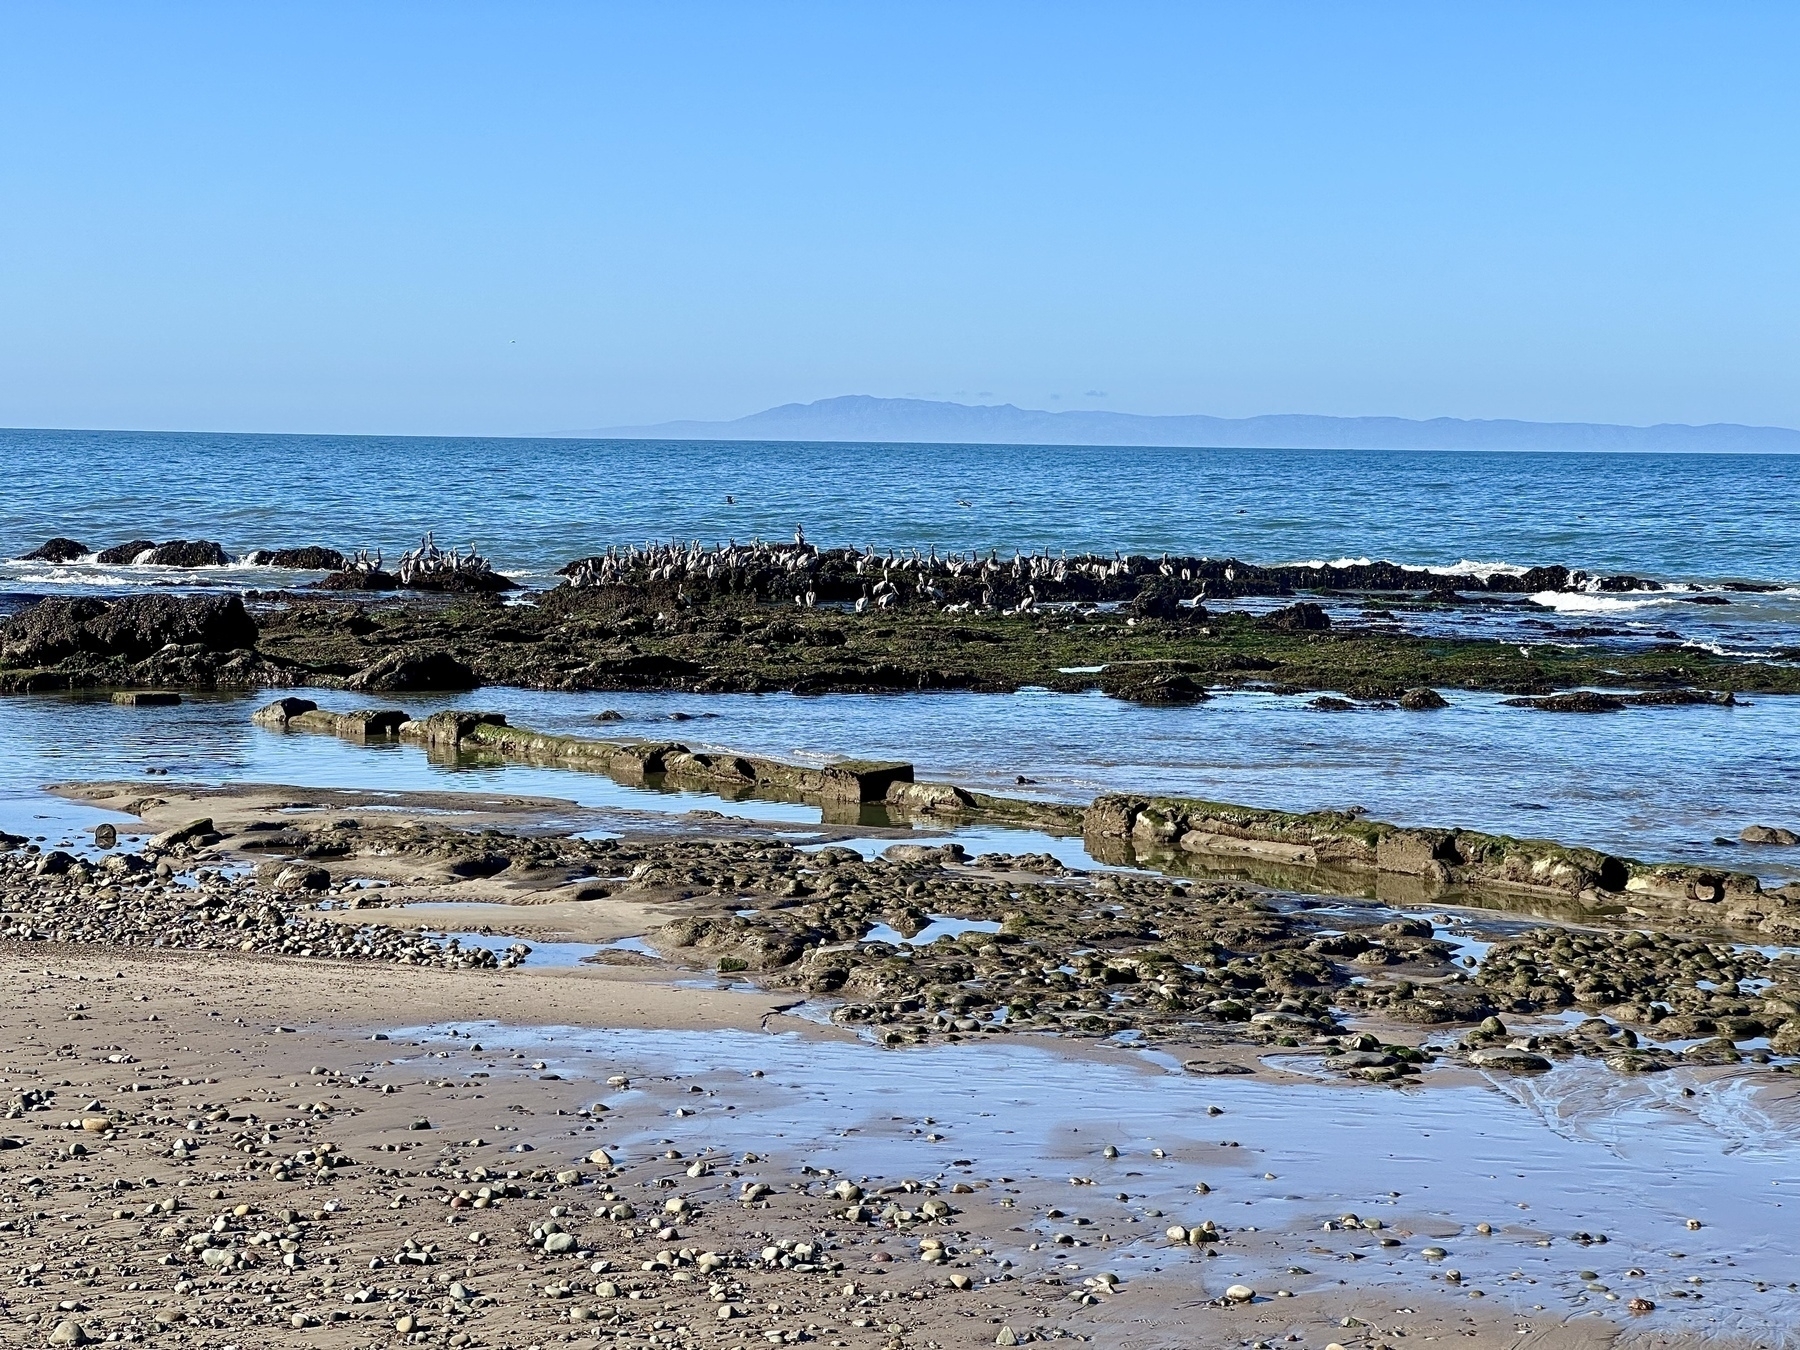 A serene beachscape is depicted with a rocky shoreline in the foreground, calm blue waters, and a mountainous landform on the horizon under a clear sky.